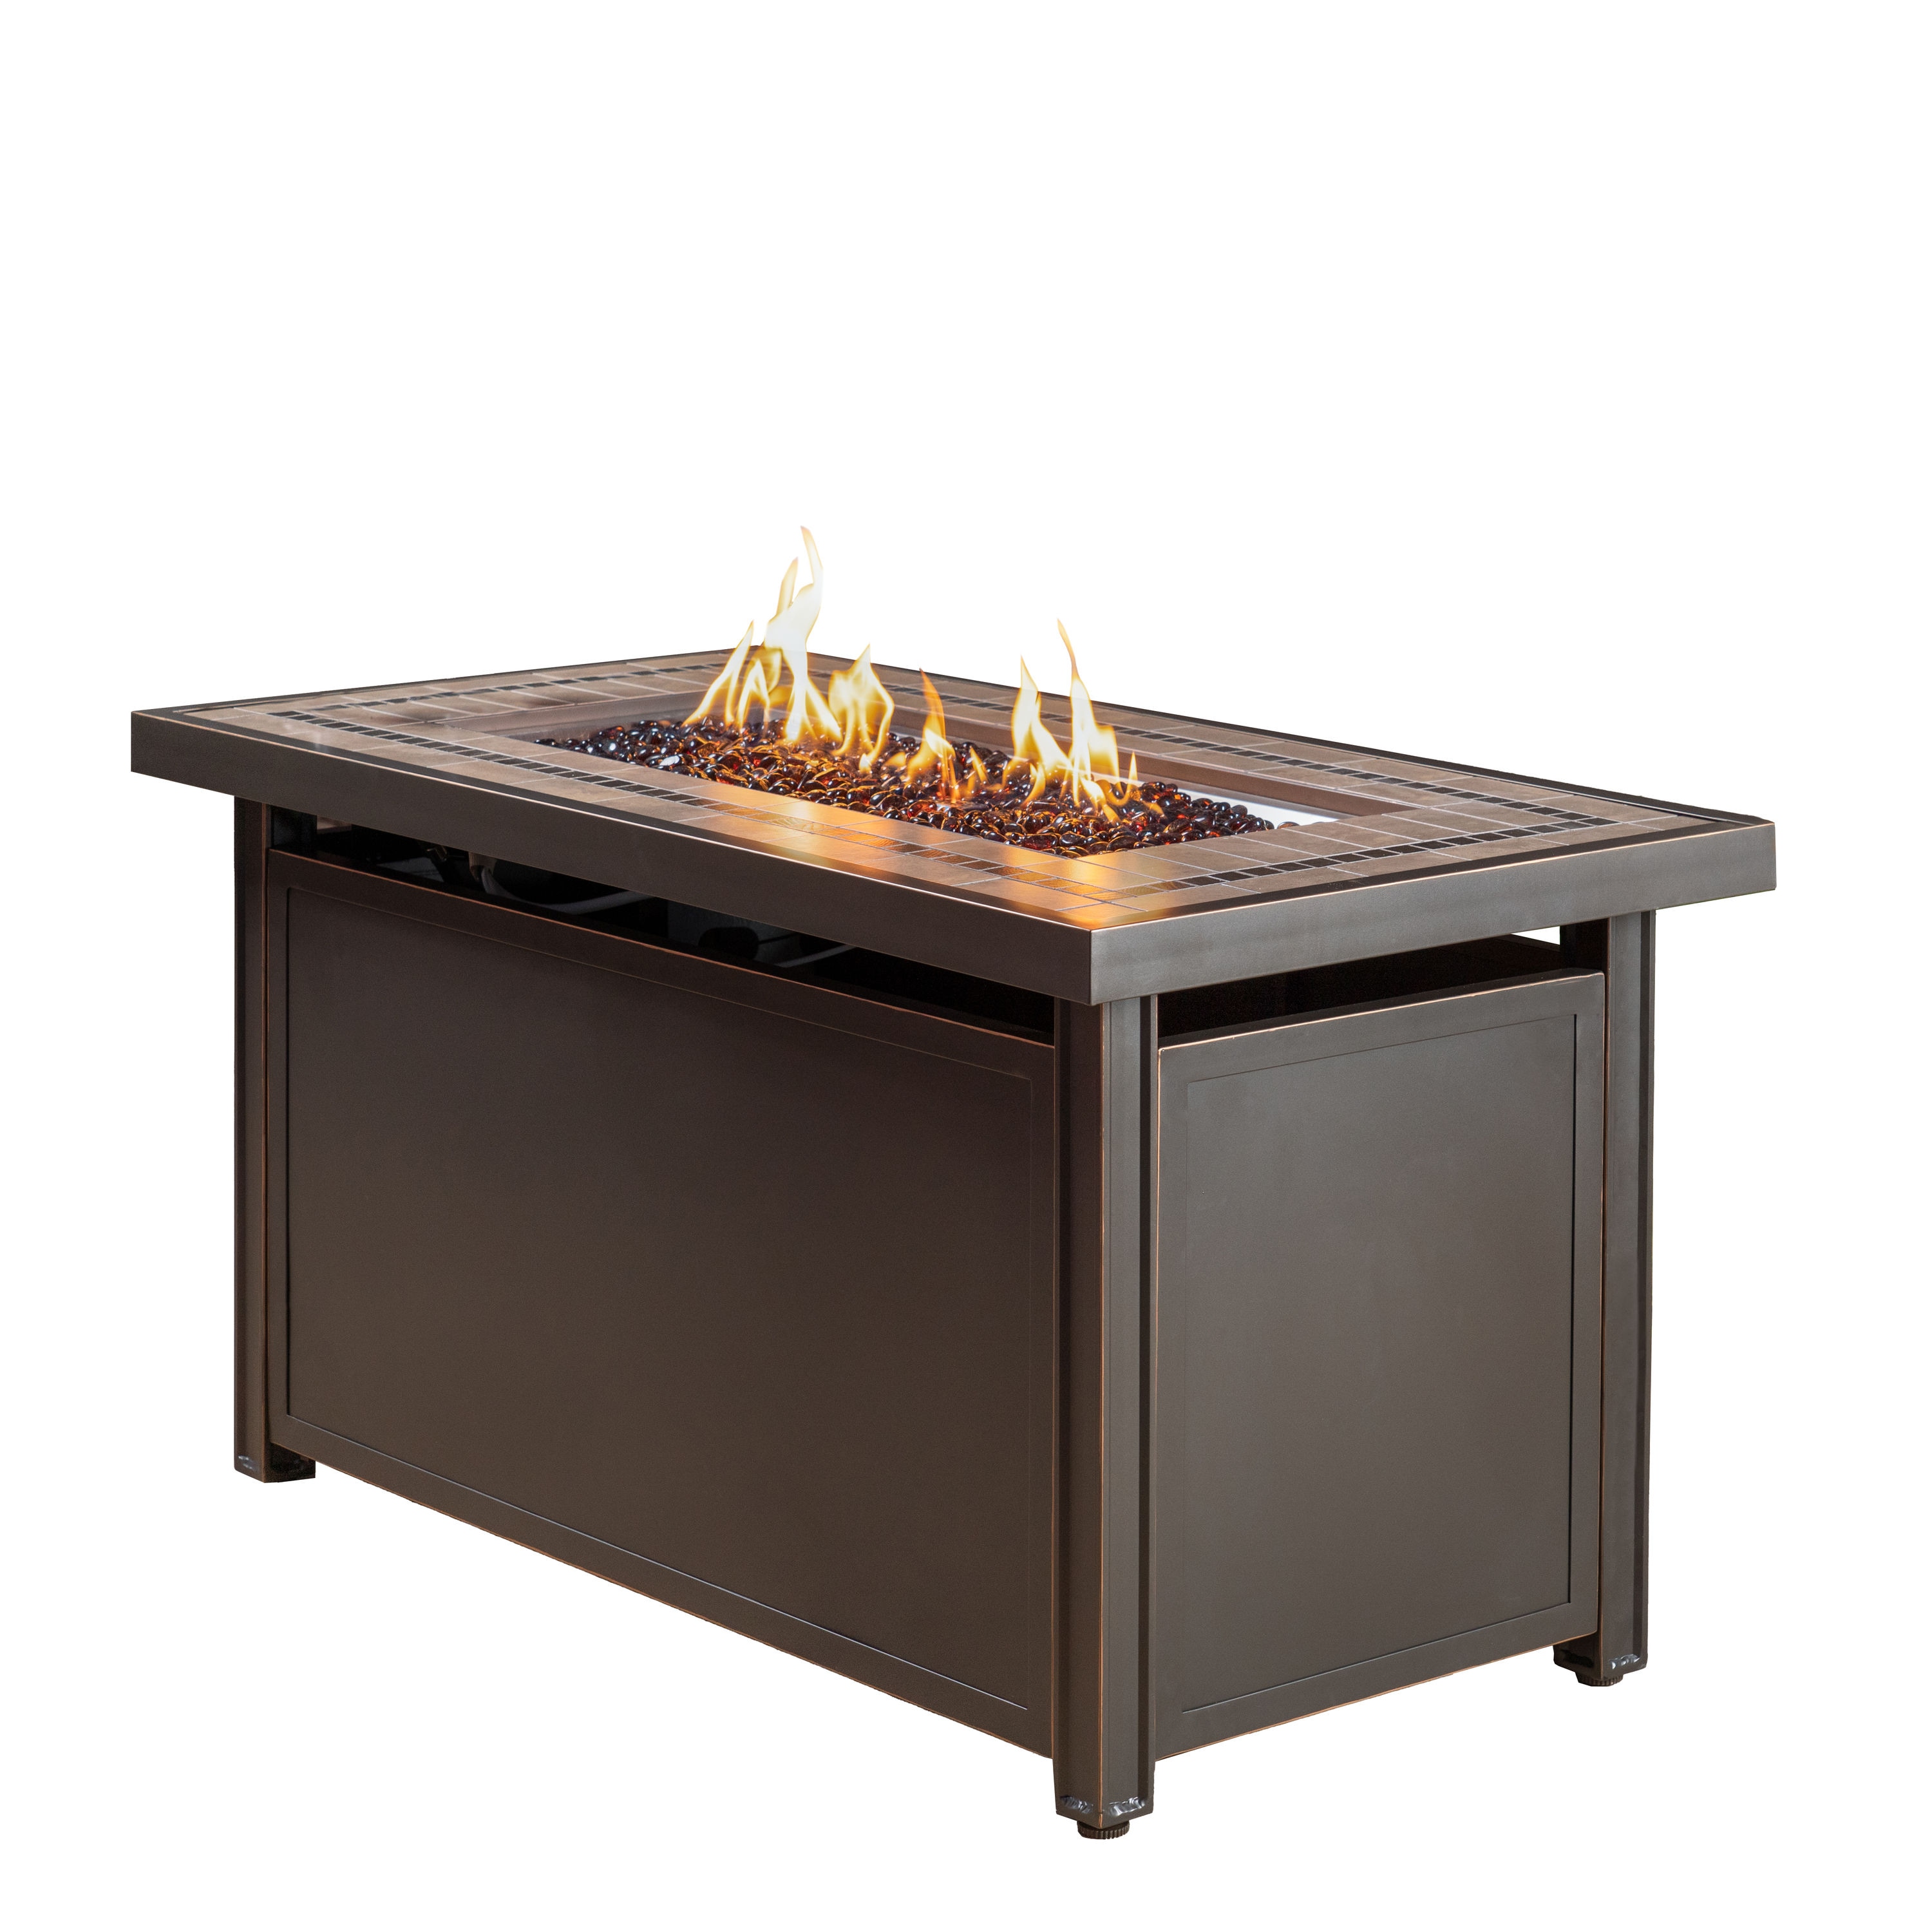 Gas Fire Pits Department At, Seasonal Trends Propane Fire Pit